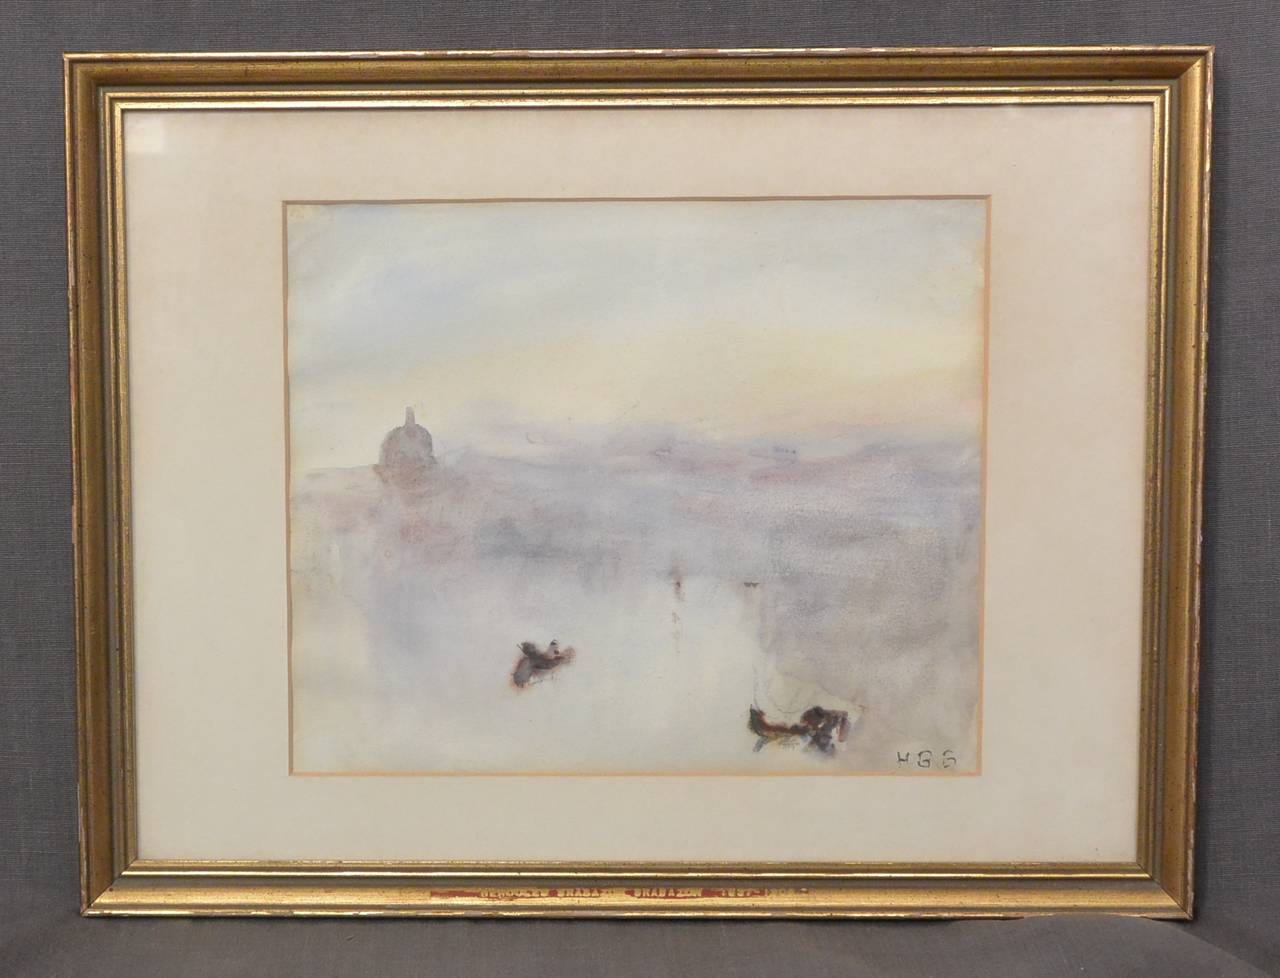 Hercules Brabazon Brabazon watercolor of Venetian view. Signed with initials HBB inscribed in artist's hand. 
Dimension: Frame: 12.5